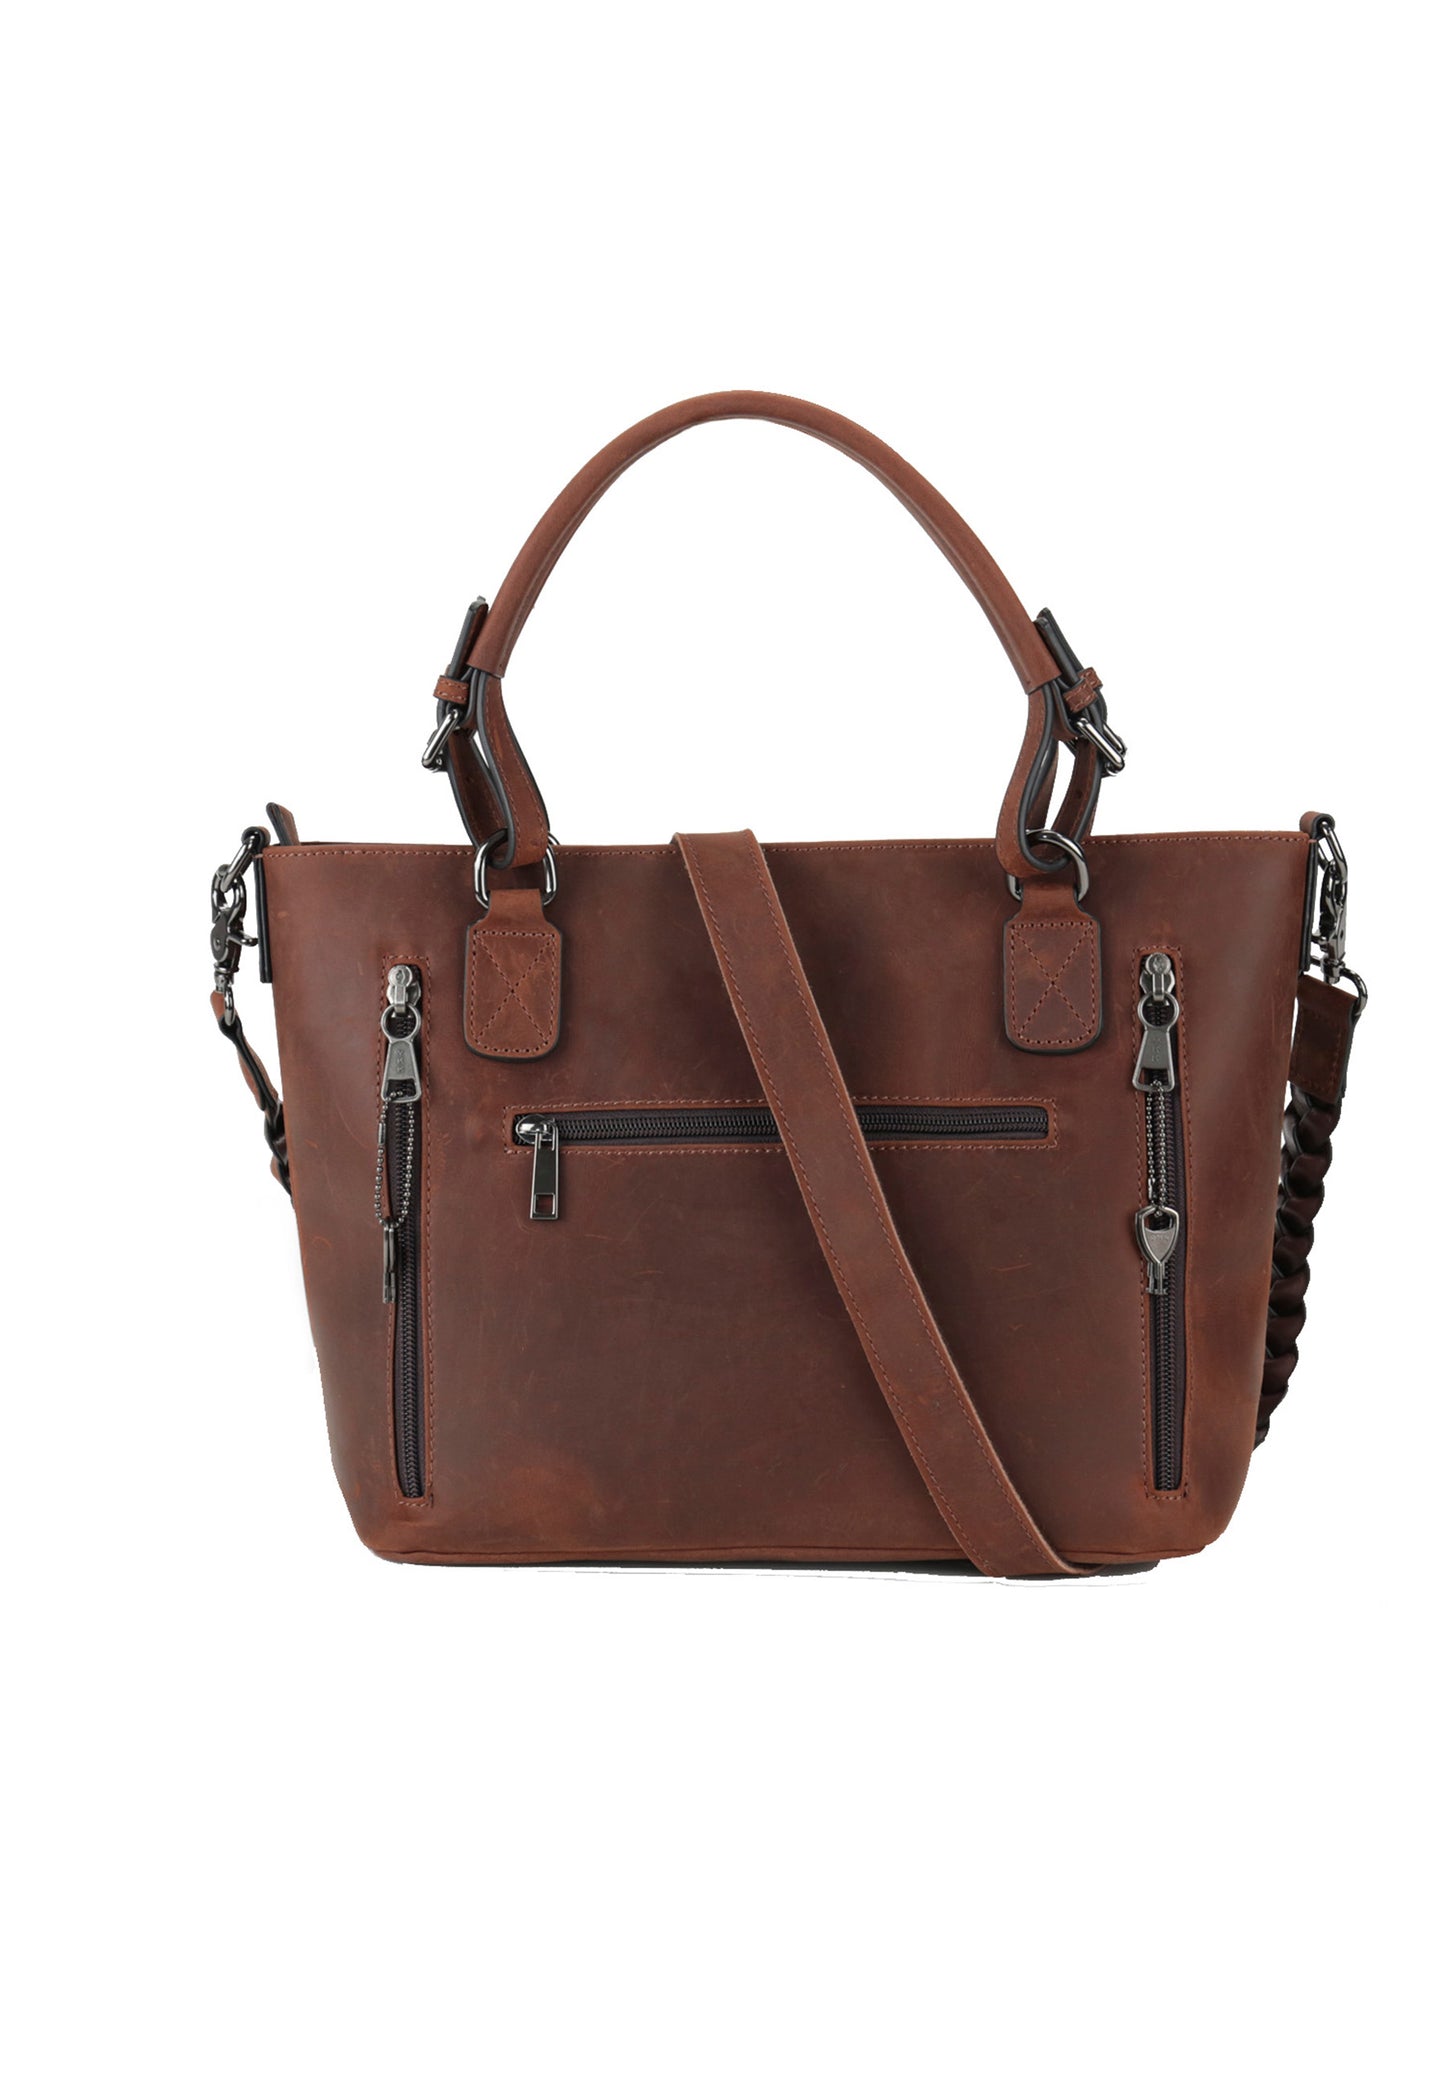 Leather concealed carry handbag with dual access pocket